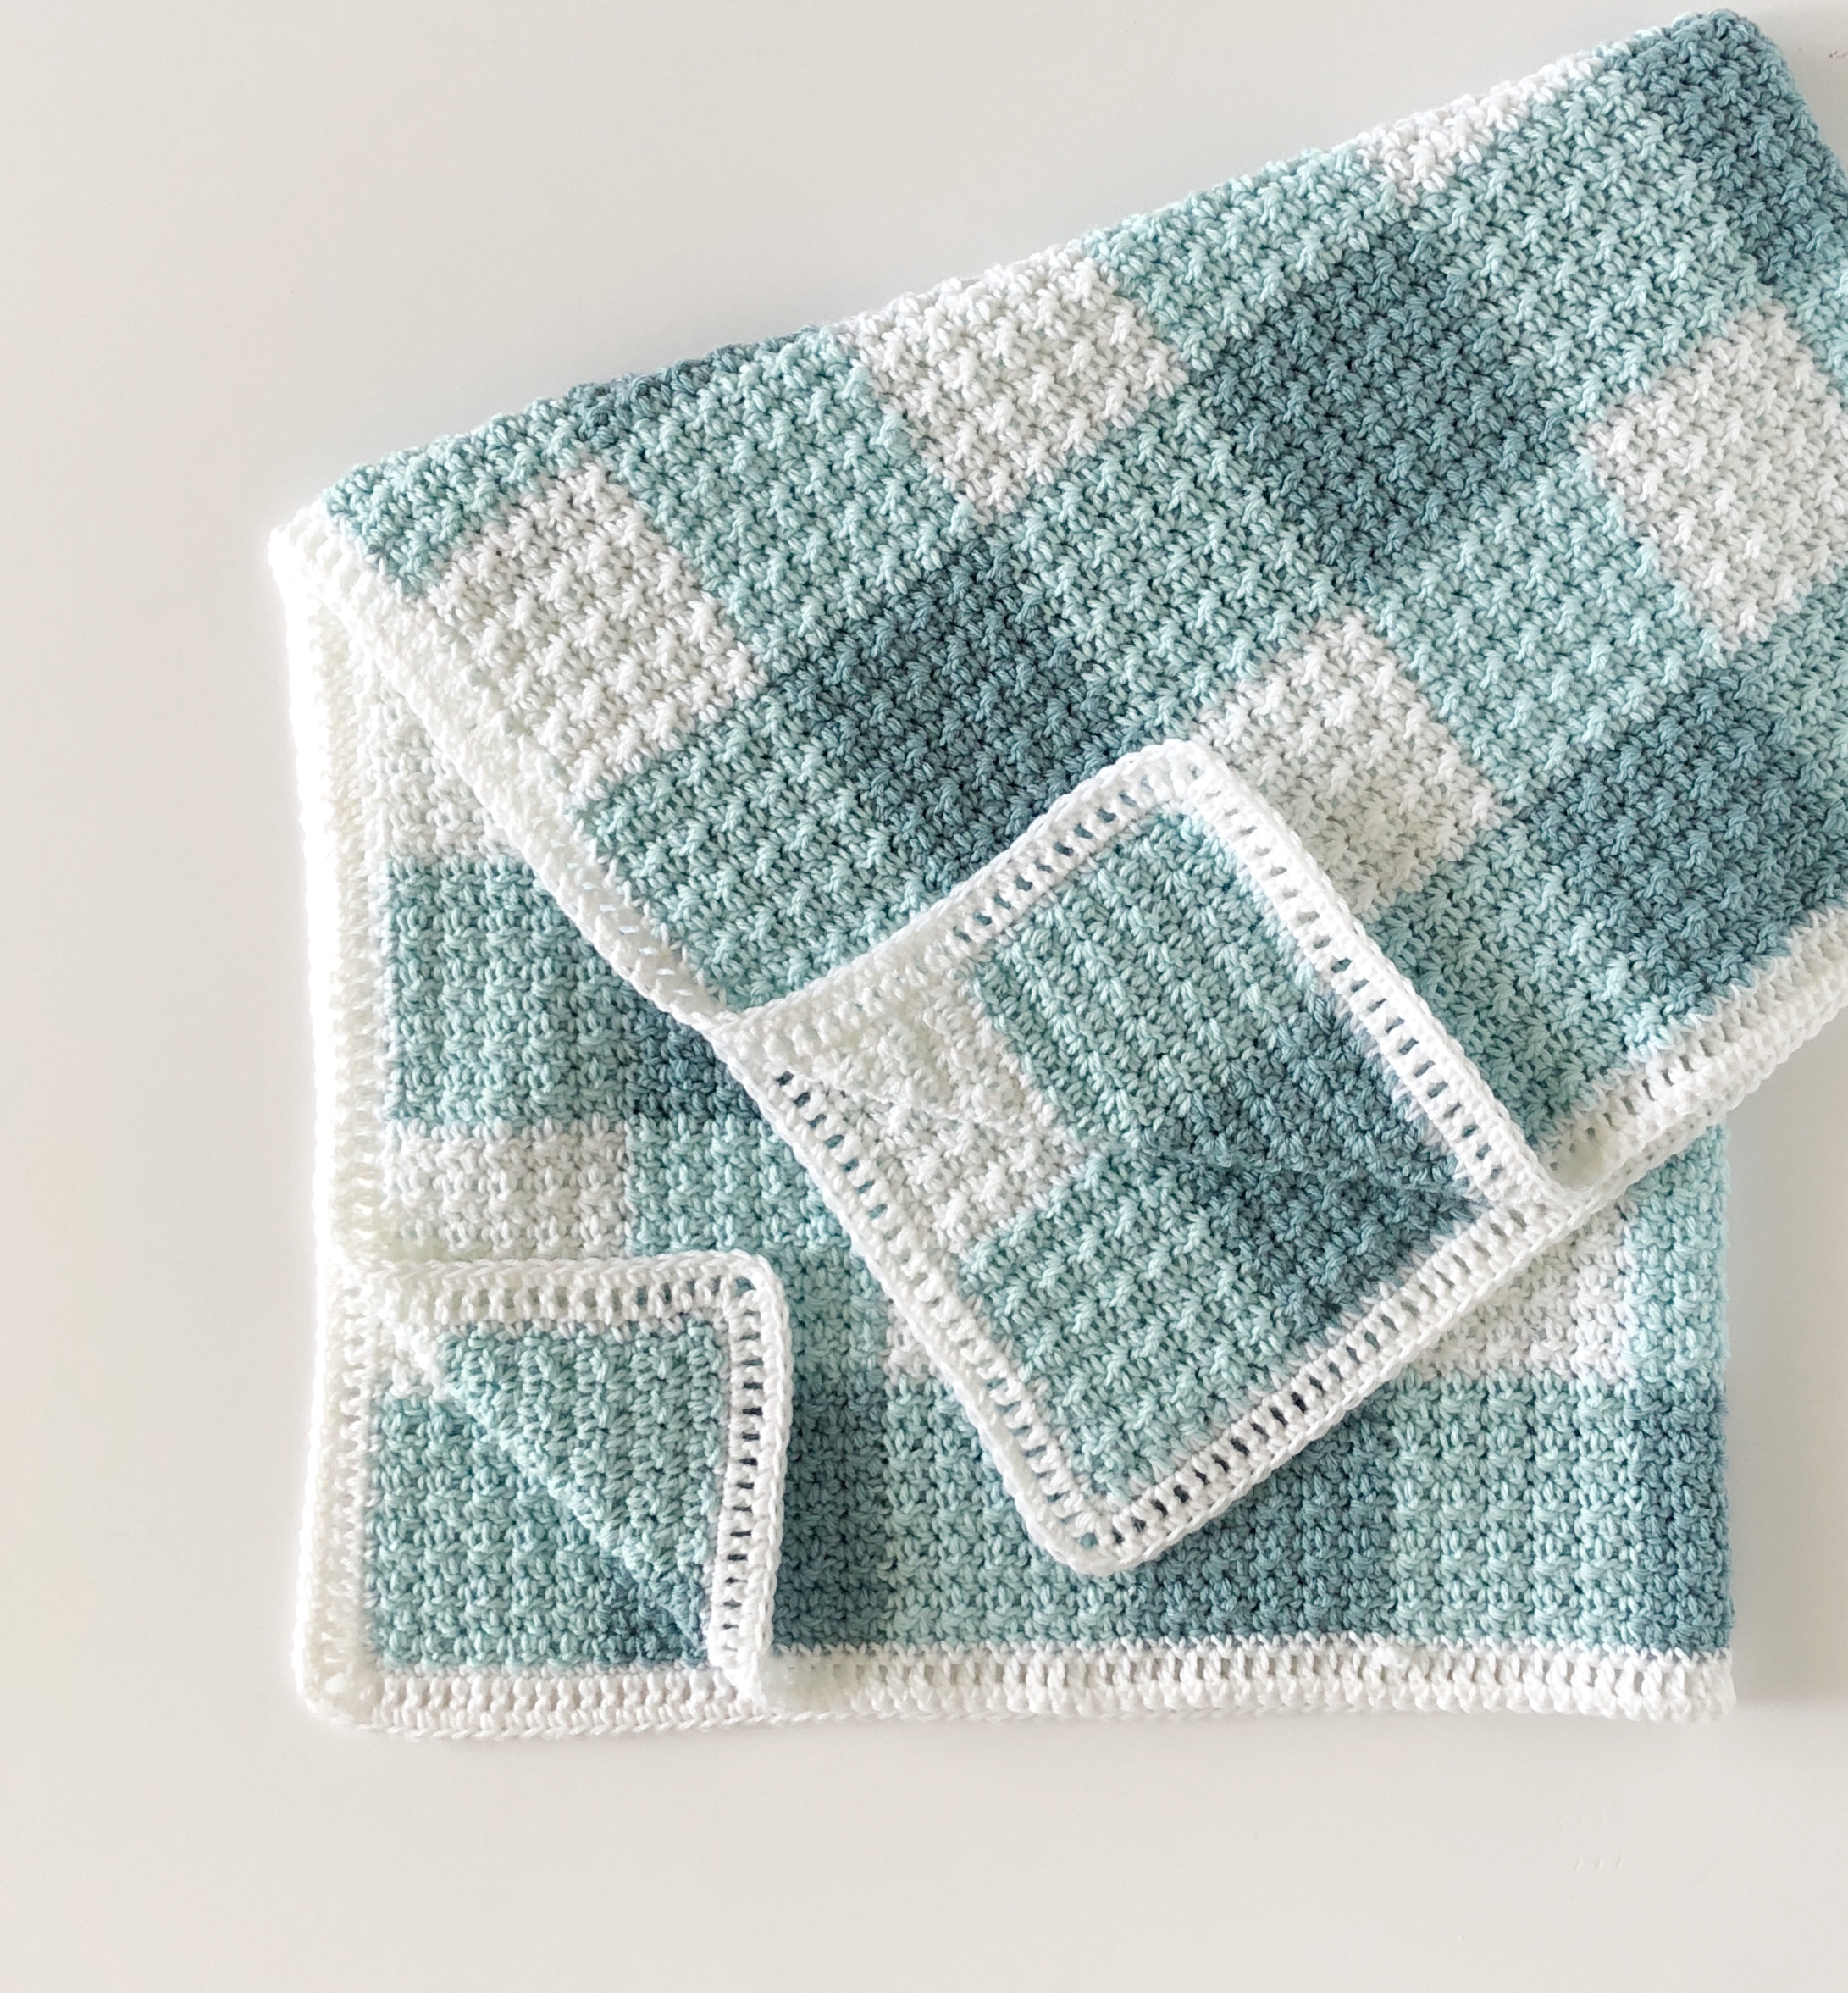 Download Crochet Teal Gingham Blanket | Daisy Farm Crafts